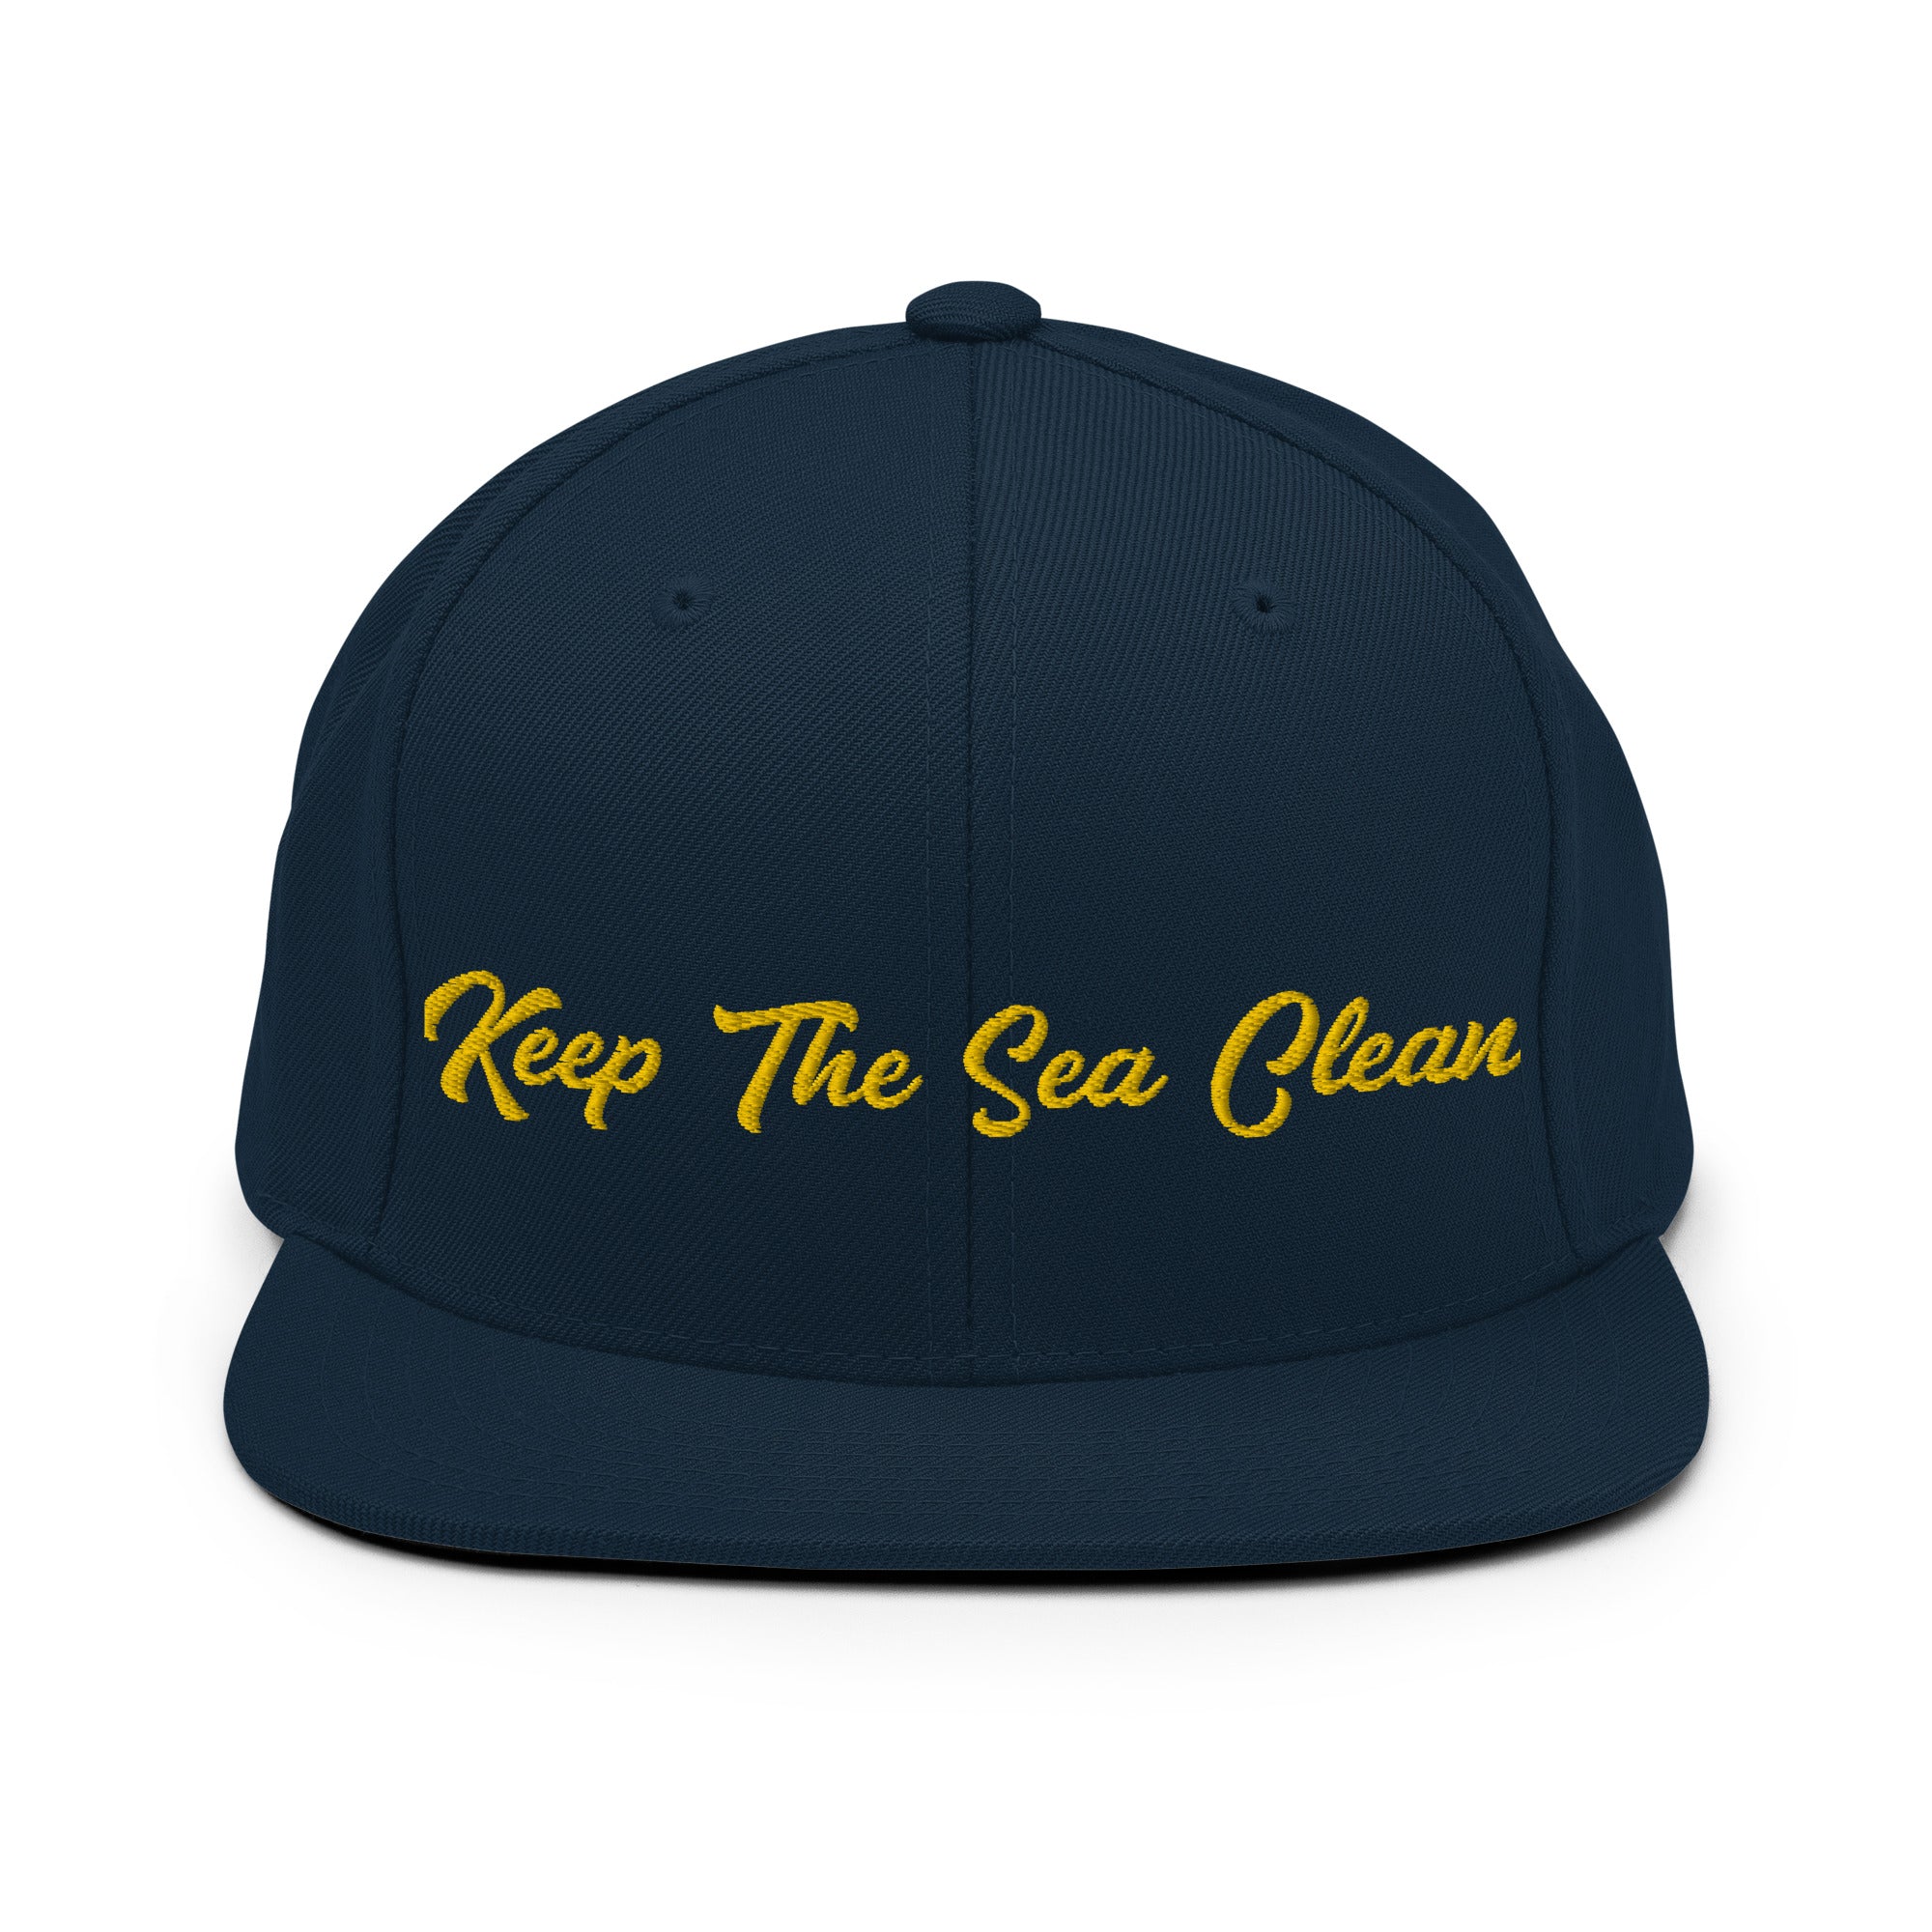 Casquette Snapback Wool Blend Keep The Sea Clean Gold